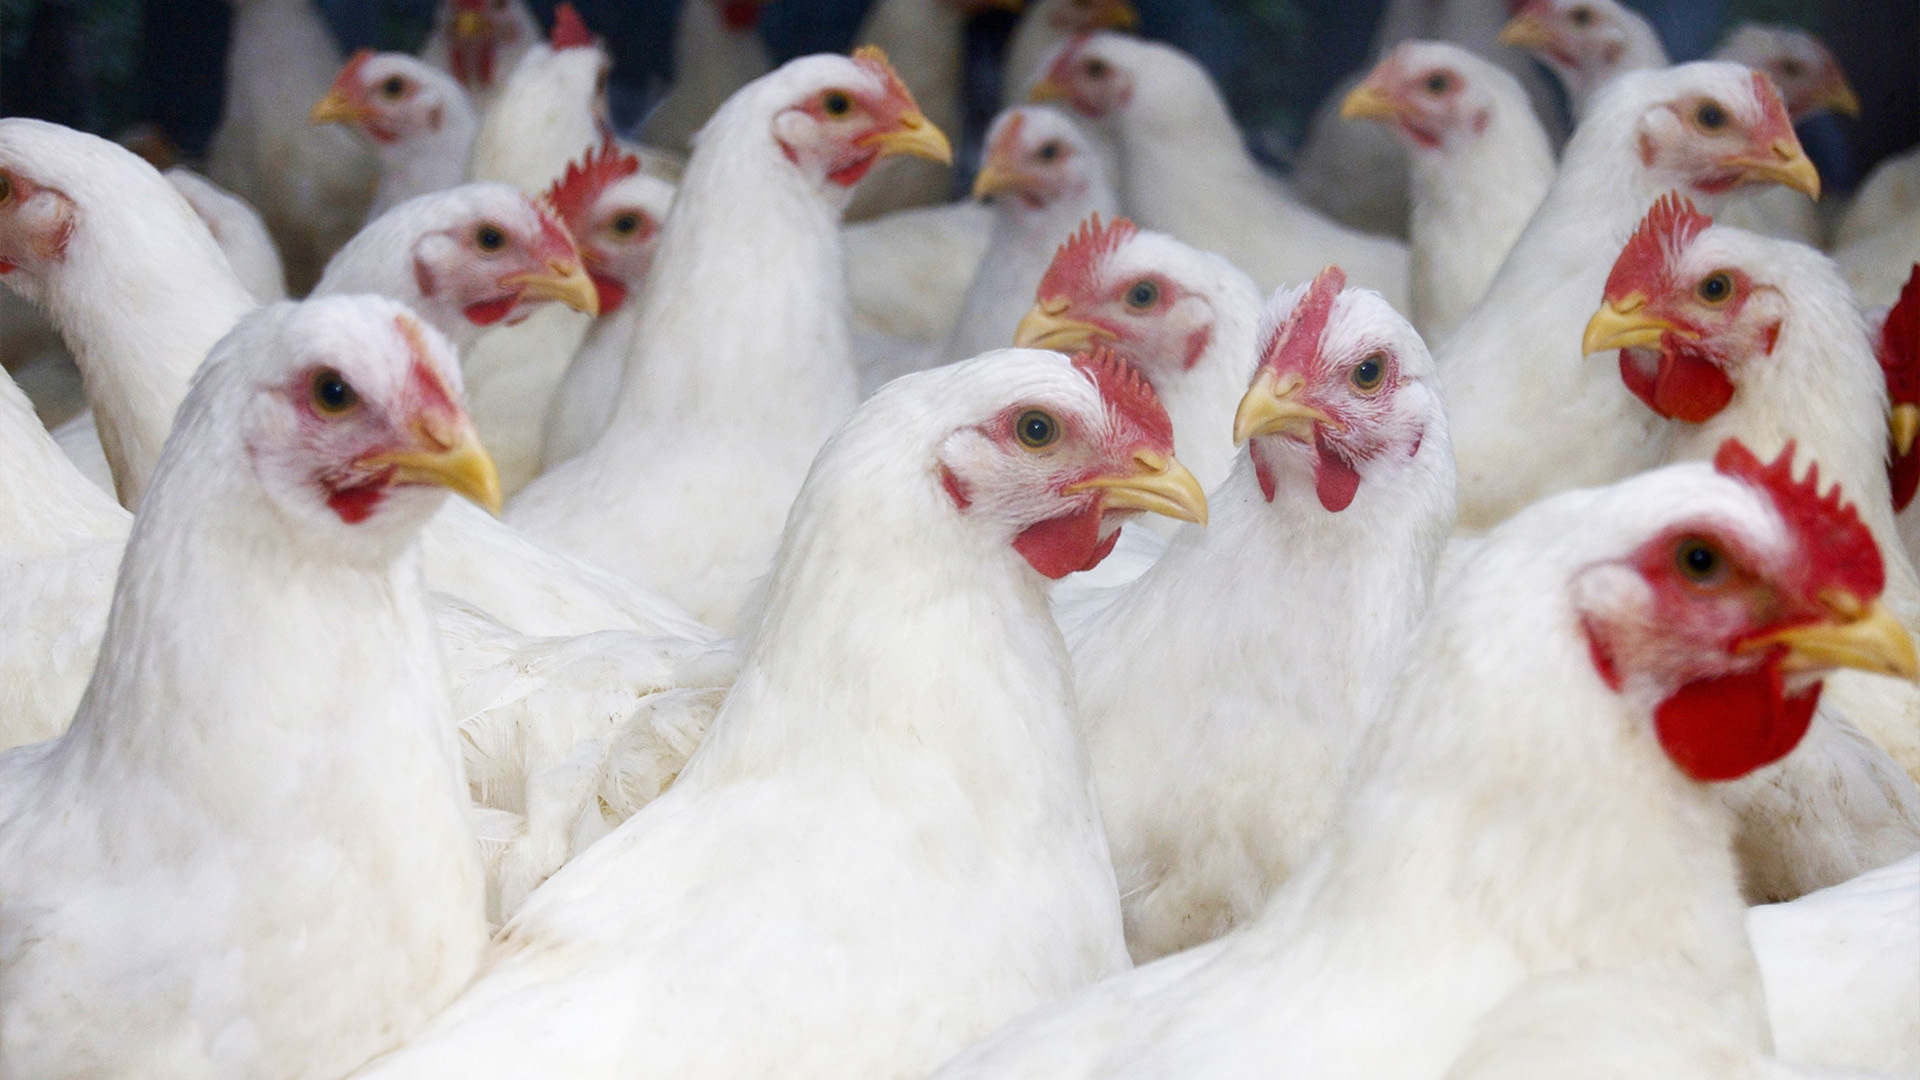 The World Health Organization (WHO) confirmed that a 59-year-old man from Mexico died from bird flu caused by the H5N2 strain.